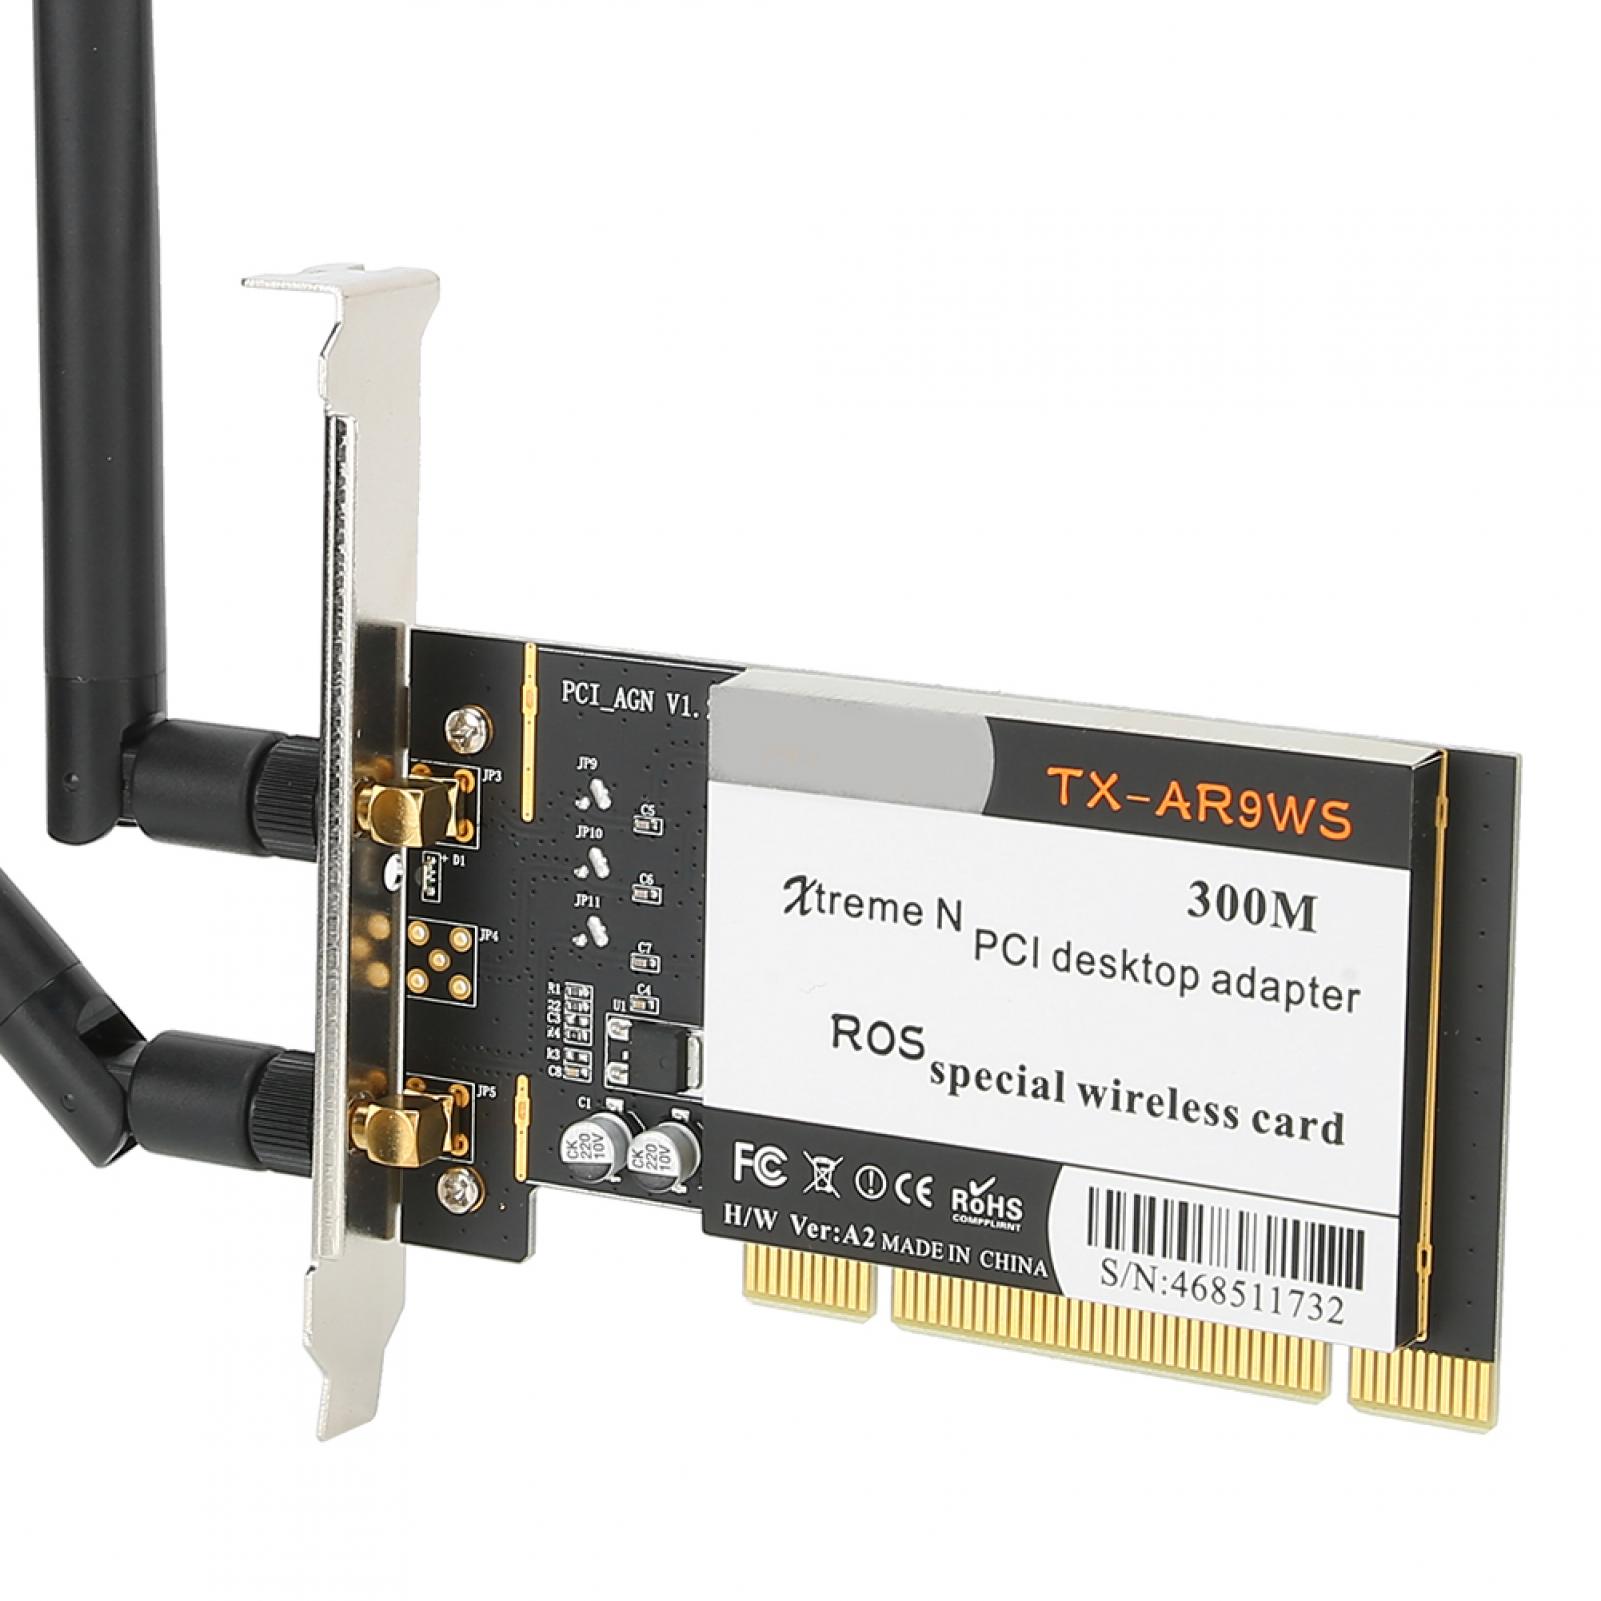 PCI Wifi Card Network Card, Ar9220 PCI Desktop Adapter, For Xp 32/64 - image 1 of 8